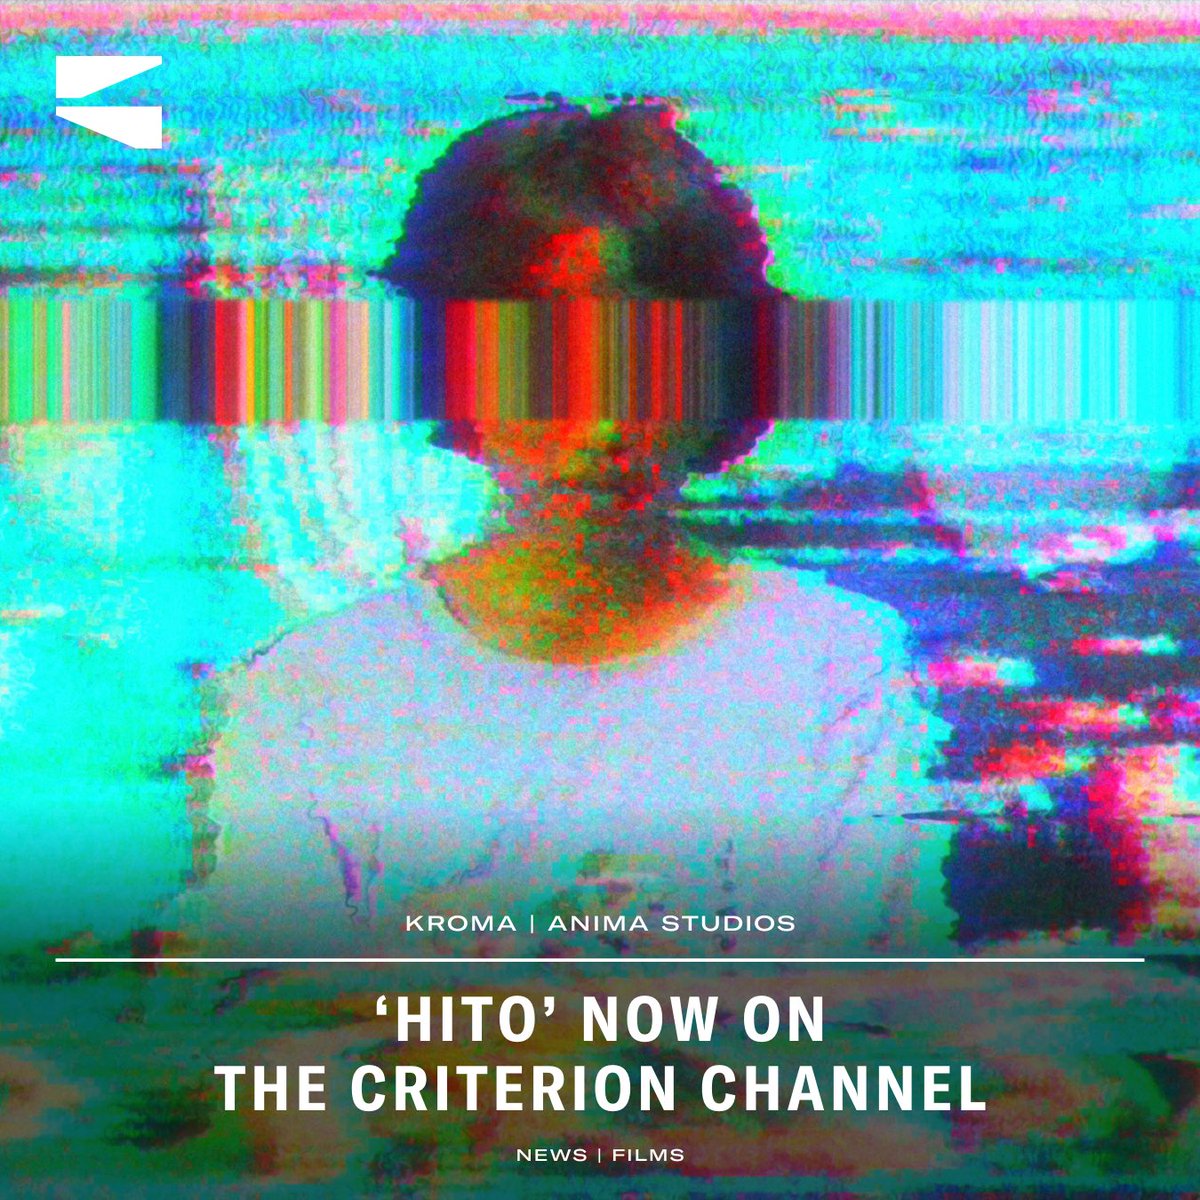 Stephen Lopez’s award-winning short film “HITO” joins The Criterion Channels's 'When the Apocalypse Is Over: New Independent Philippine Cinema' category. Visit linktr.ee/hito4lyf for details!